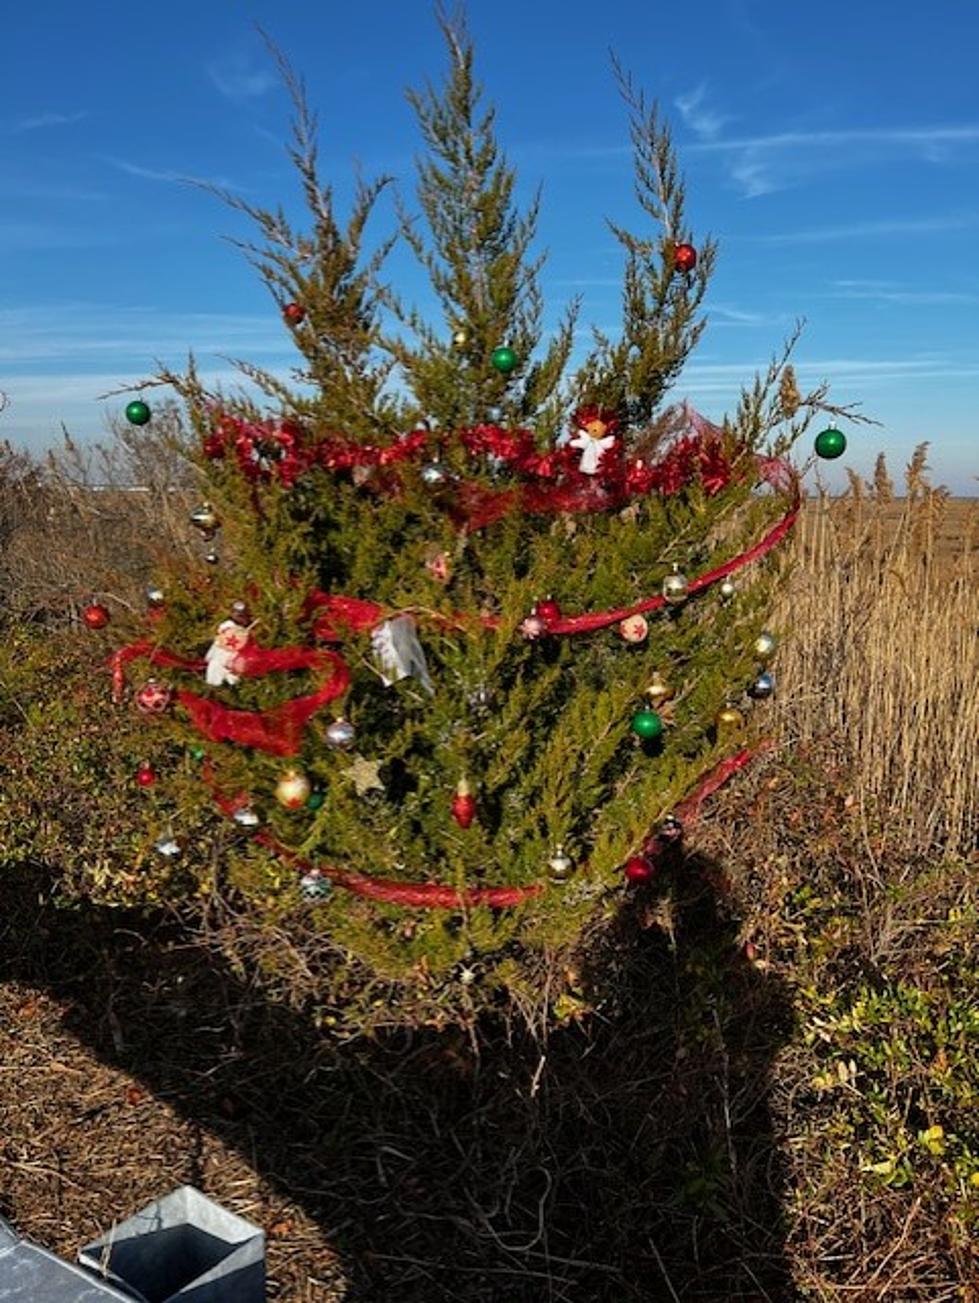 The Mysterious Christmas Trees On The Bay in Little Egg Harbor Township, NJ